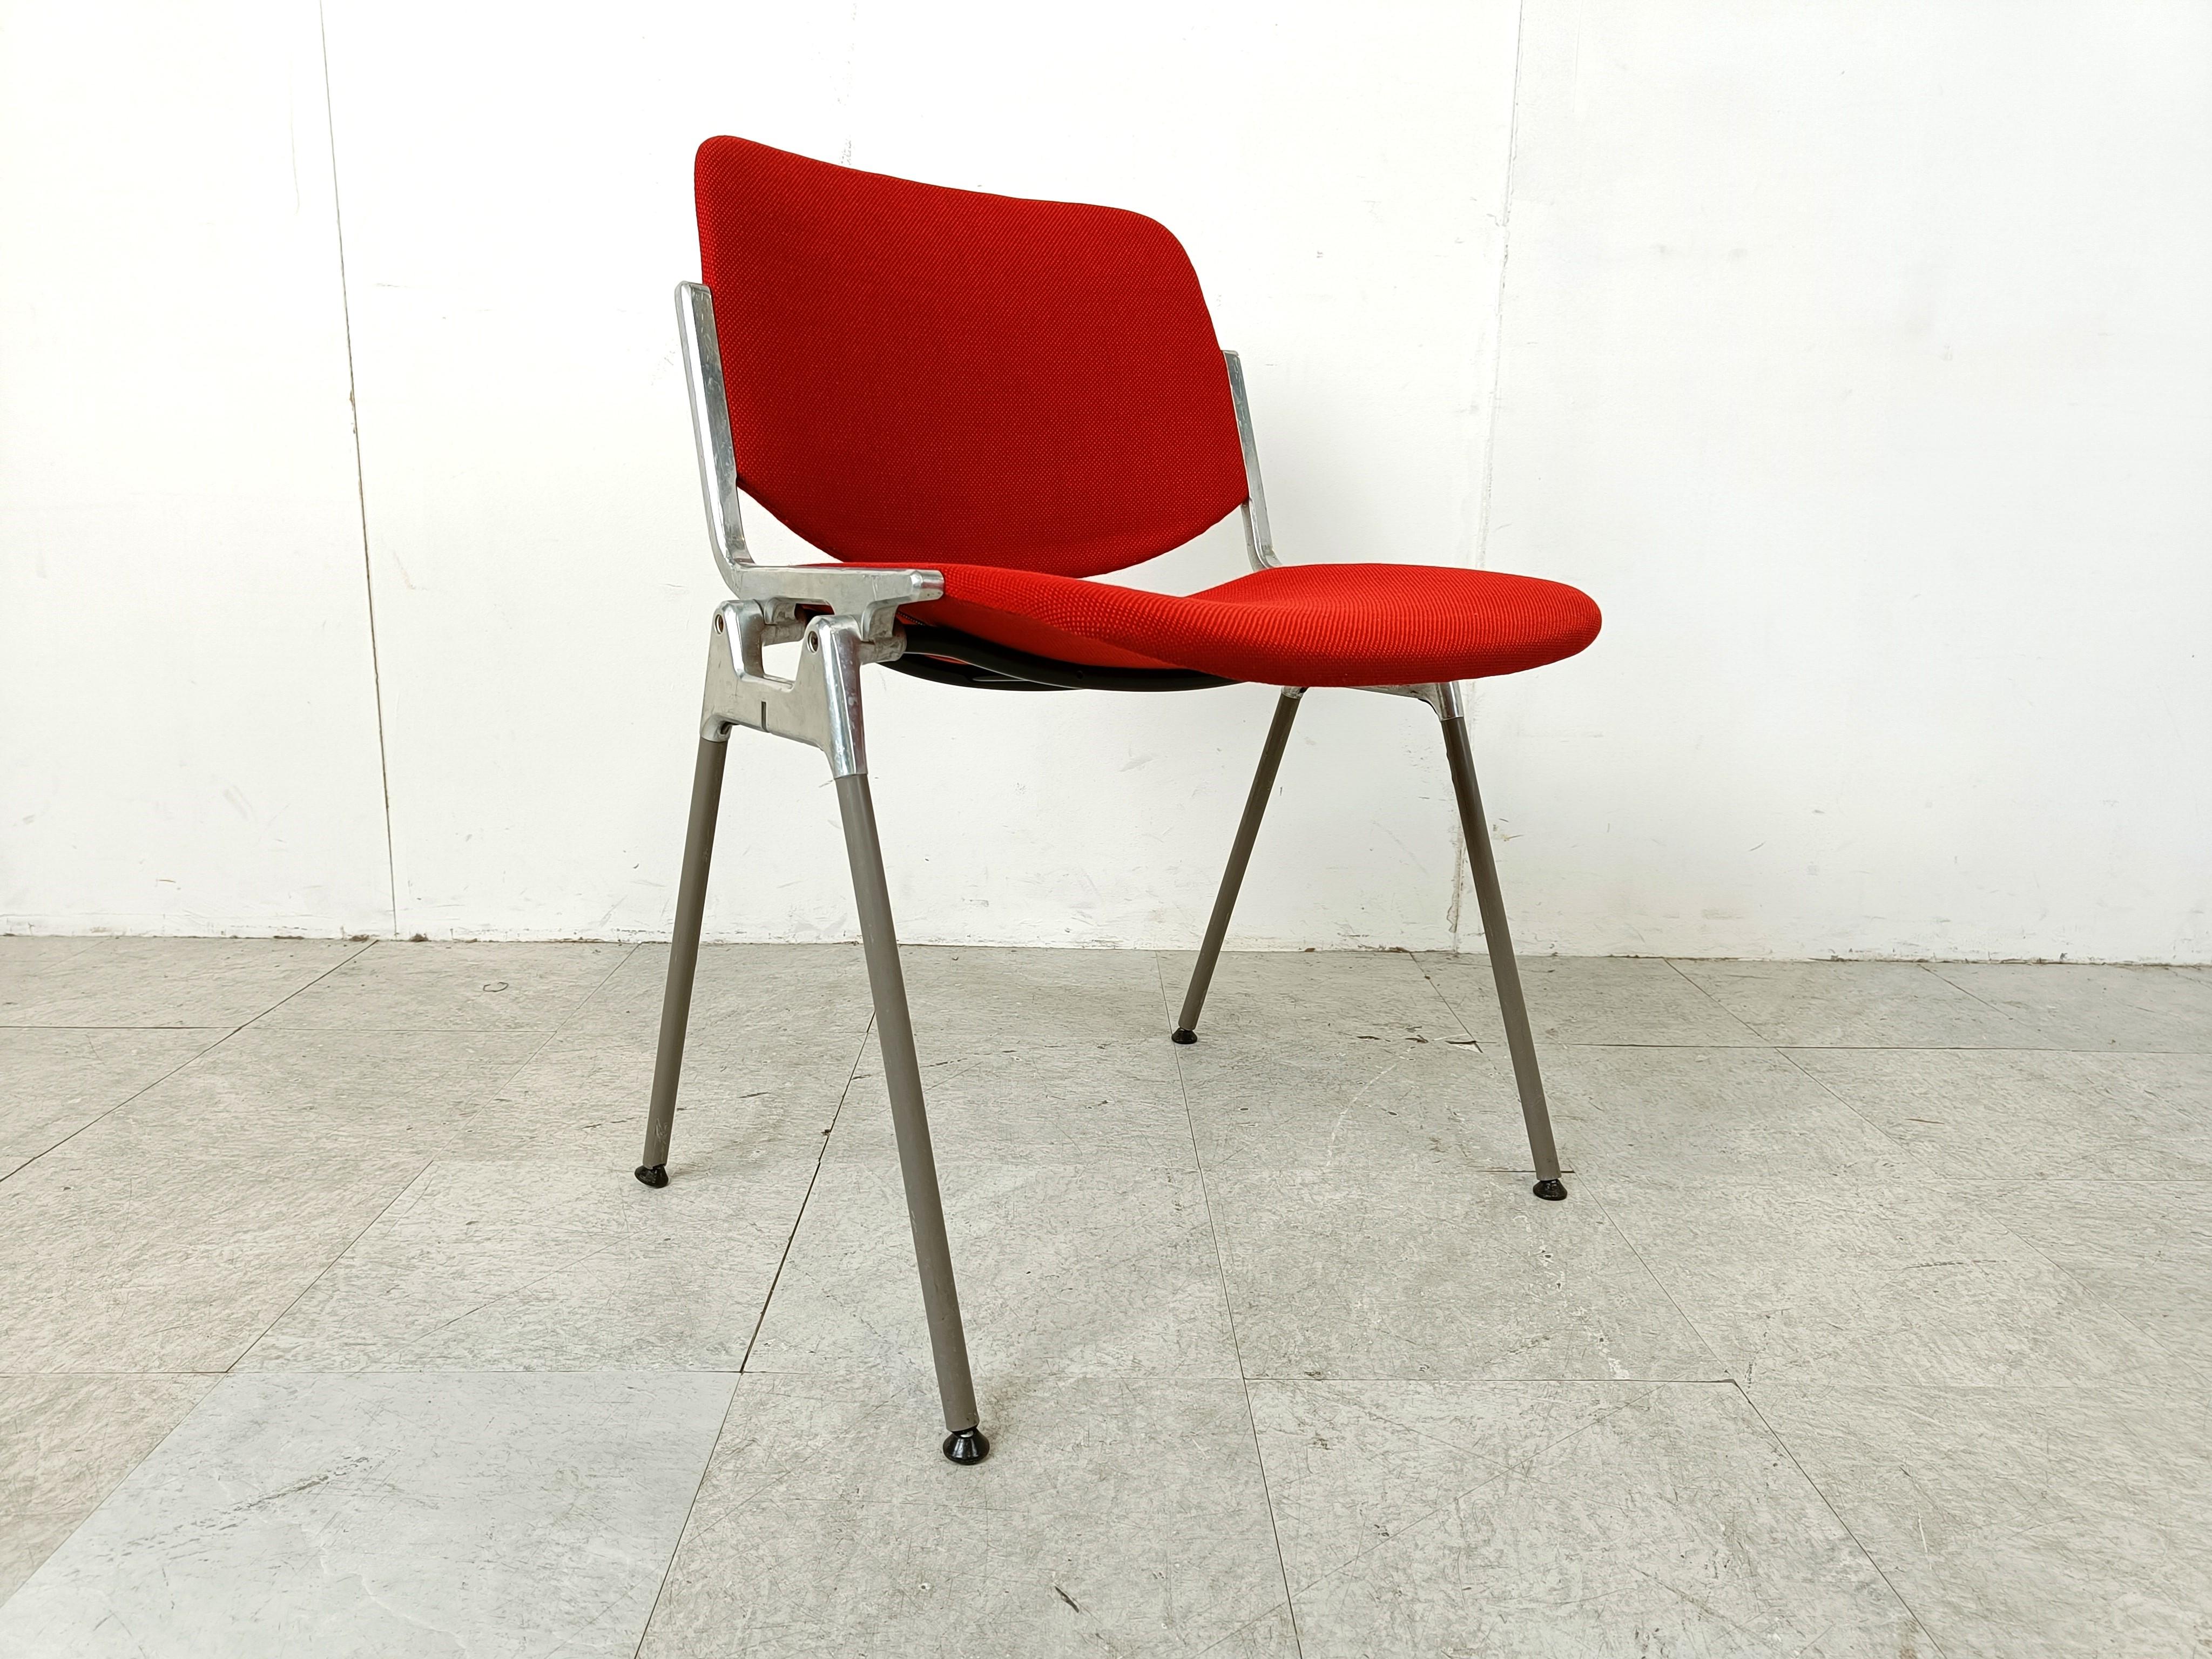 Vintage DSC 106 Side Chairs by Giancarlo Piretti for Castelli, 1970s For Sale 1